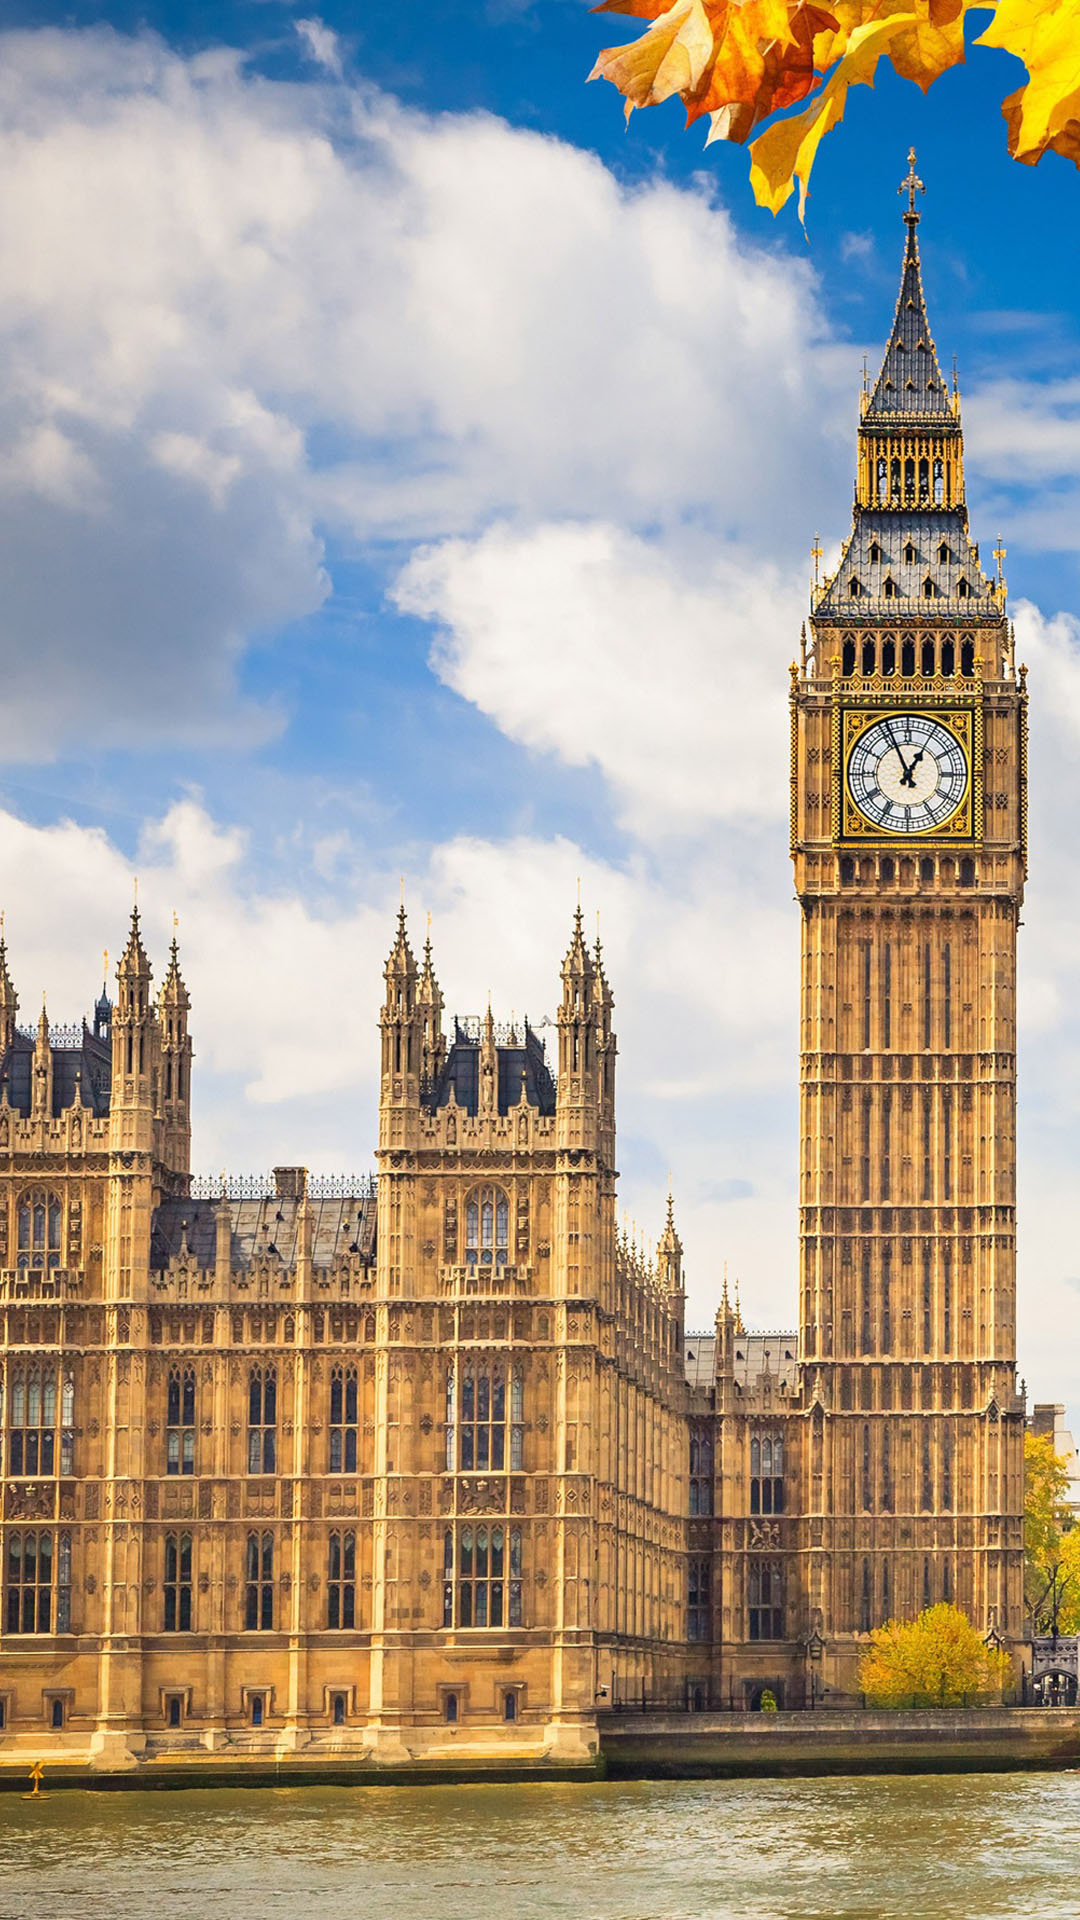 London and Big Ben, HTC One wallpaper, Desktop mobile tablet, Stunning imagery, 1080x1920 Full HD Handy